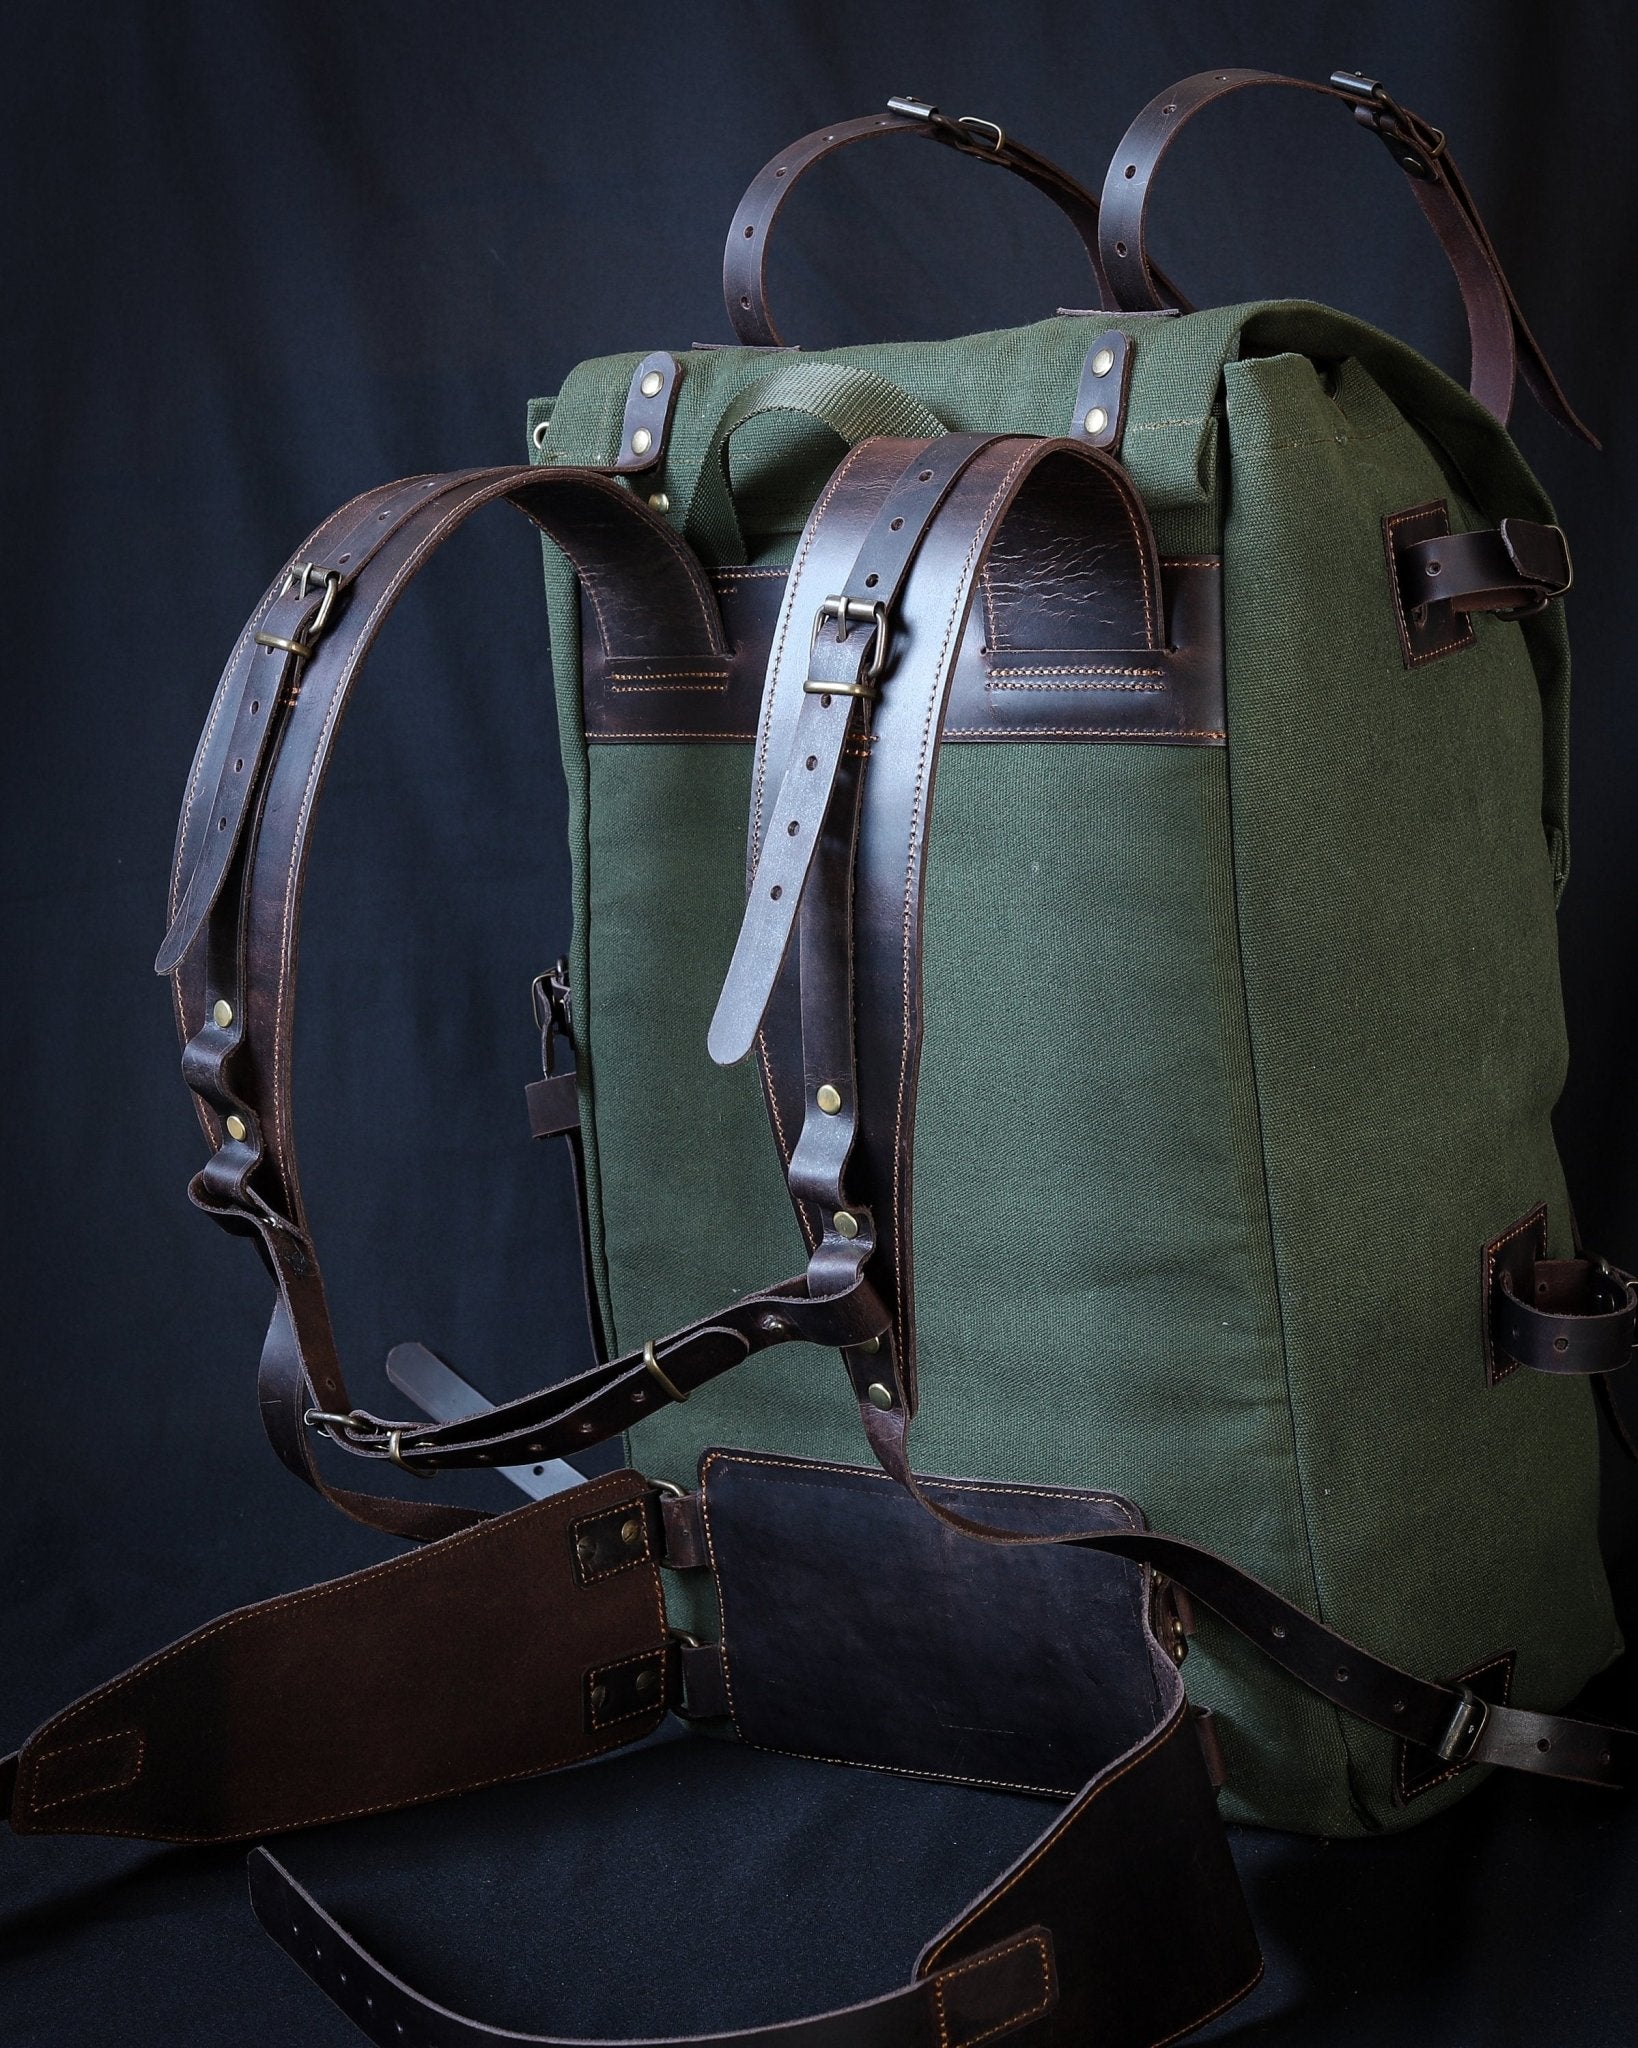 New Green Released Handmade Genuine Green Leather and Waxed Canvas Backpack for Travel, Camping | 40 Liter |   Personalization  99percenthandmade   